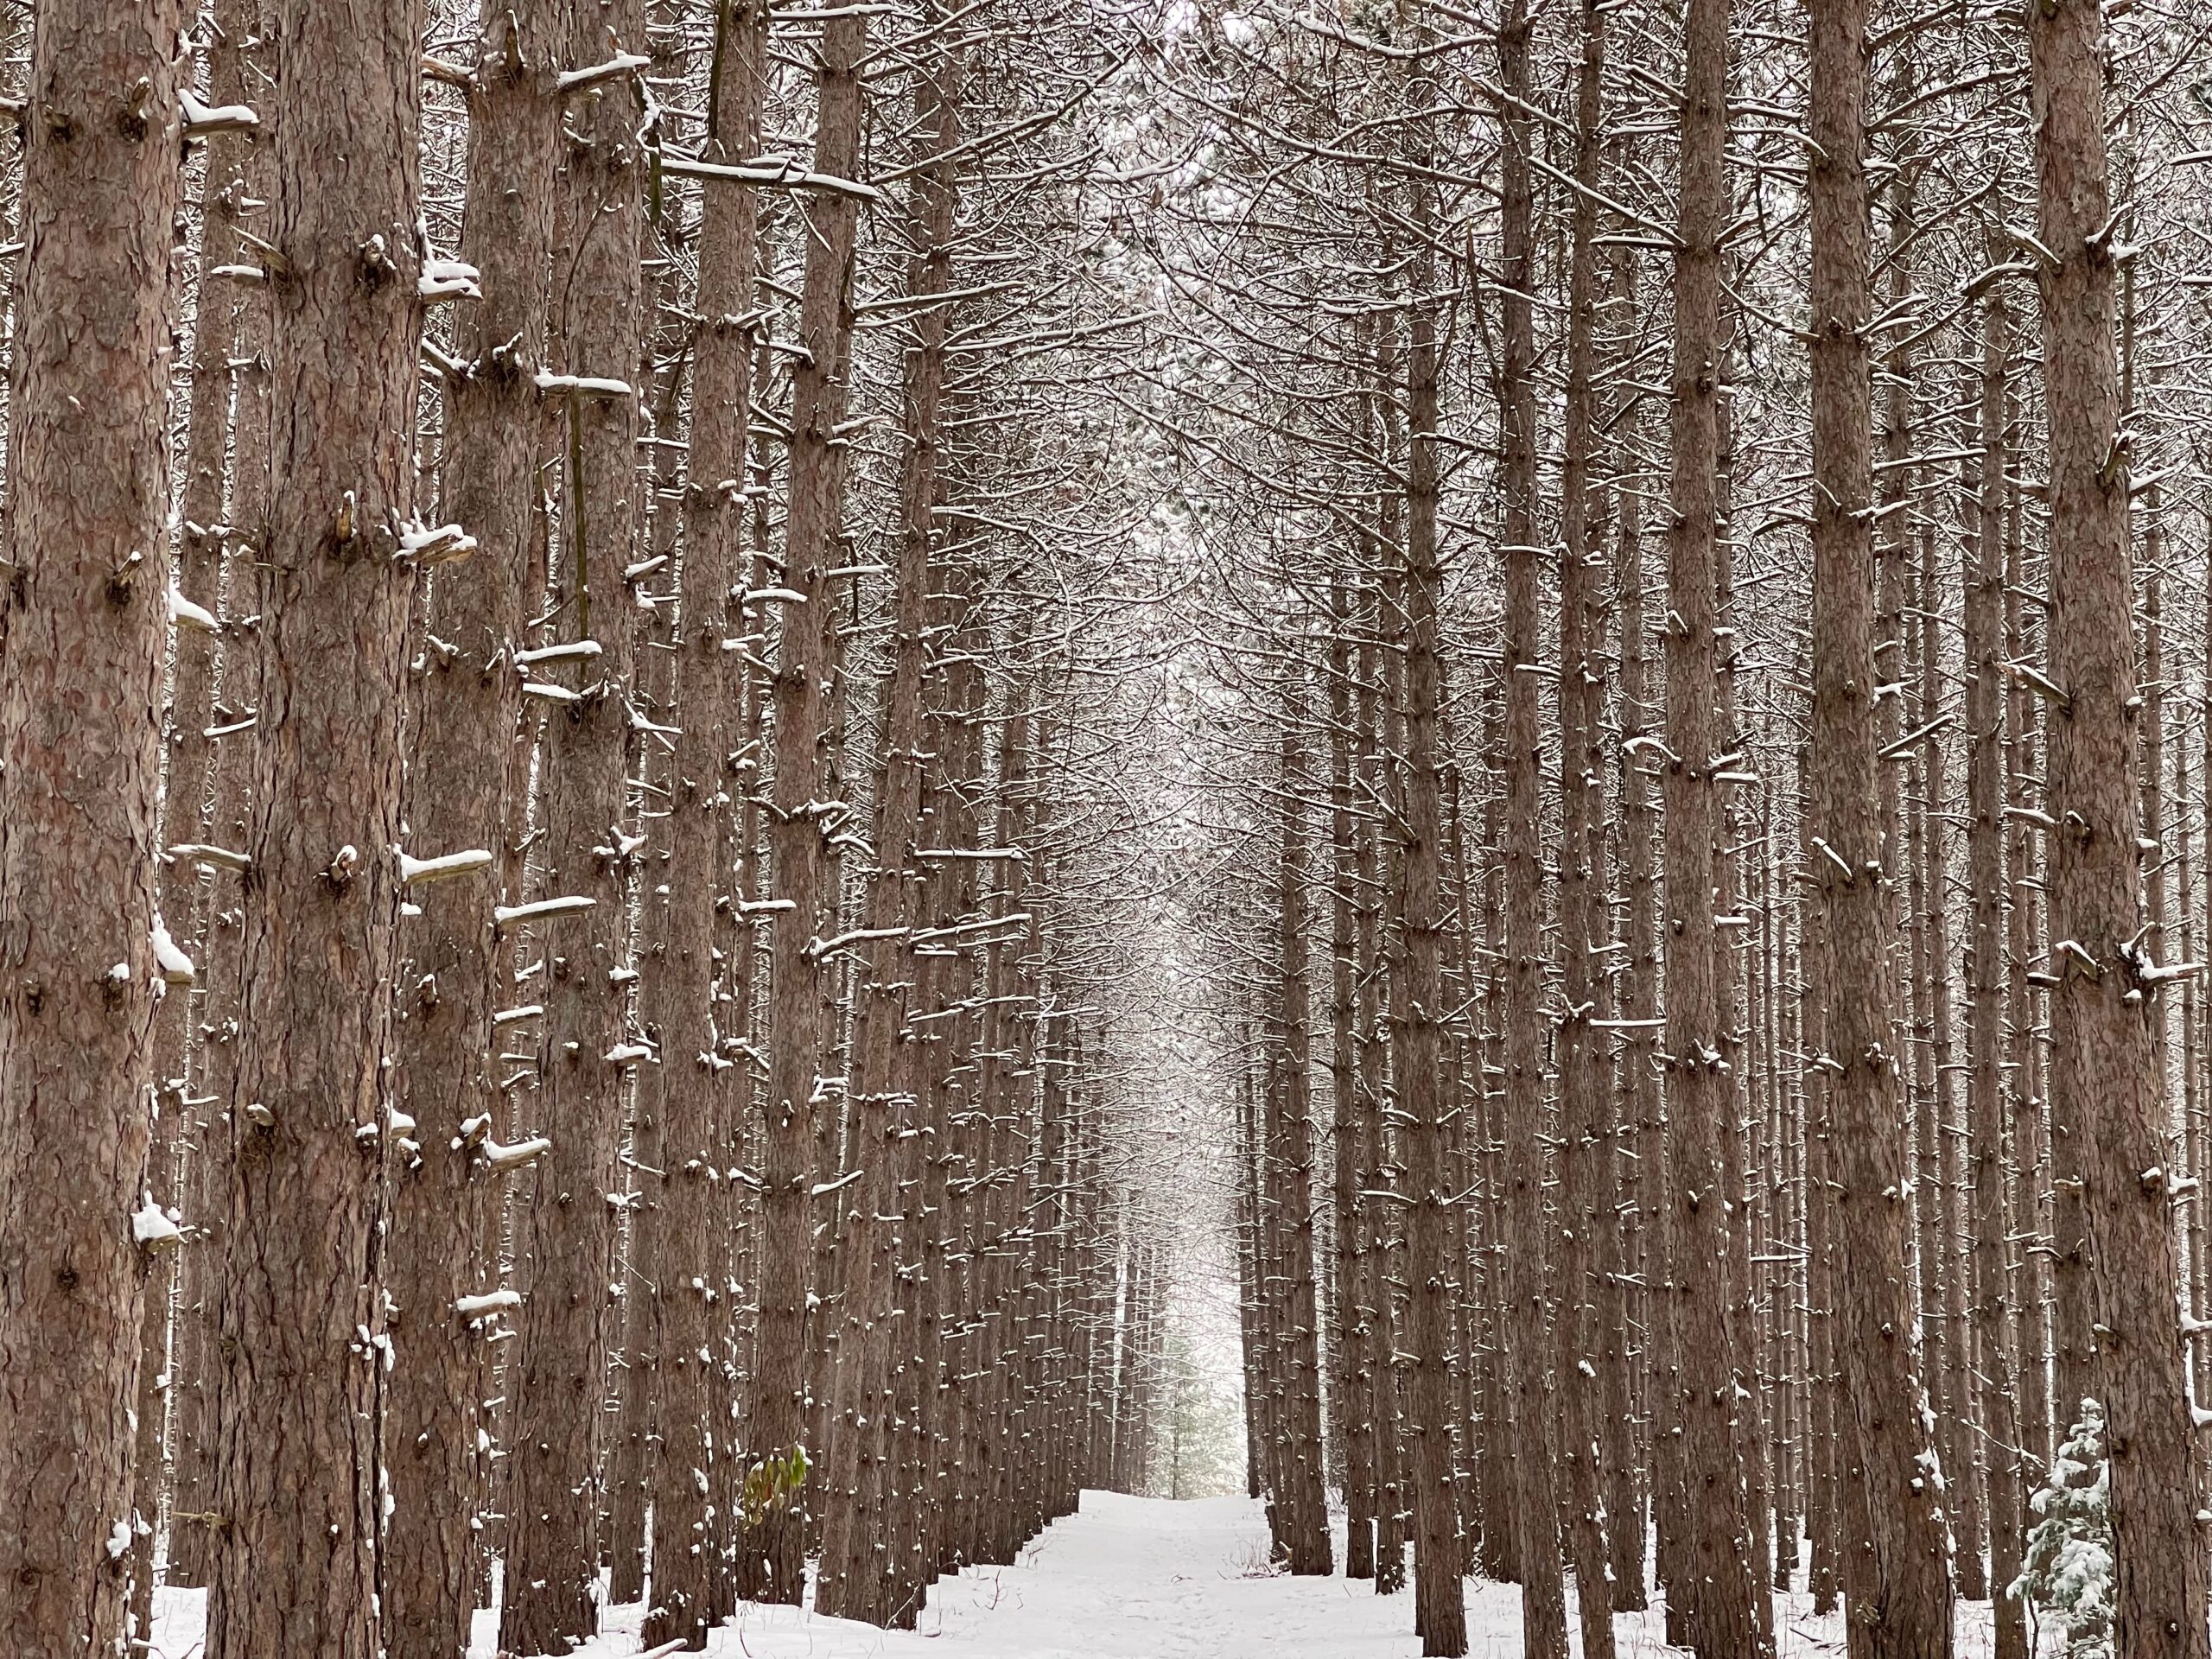 A snow covered forest.